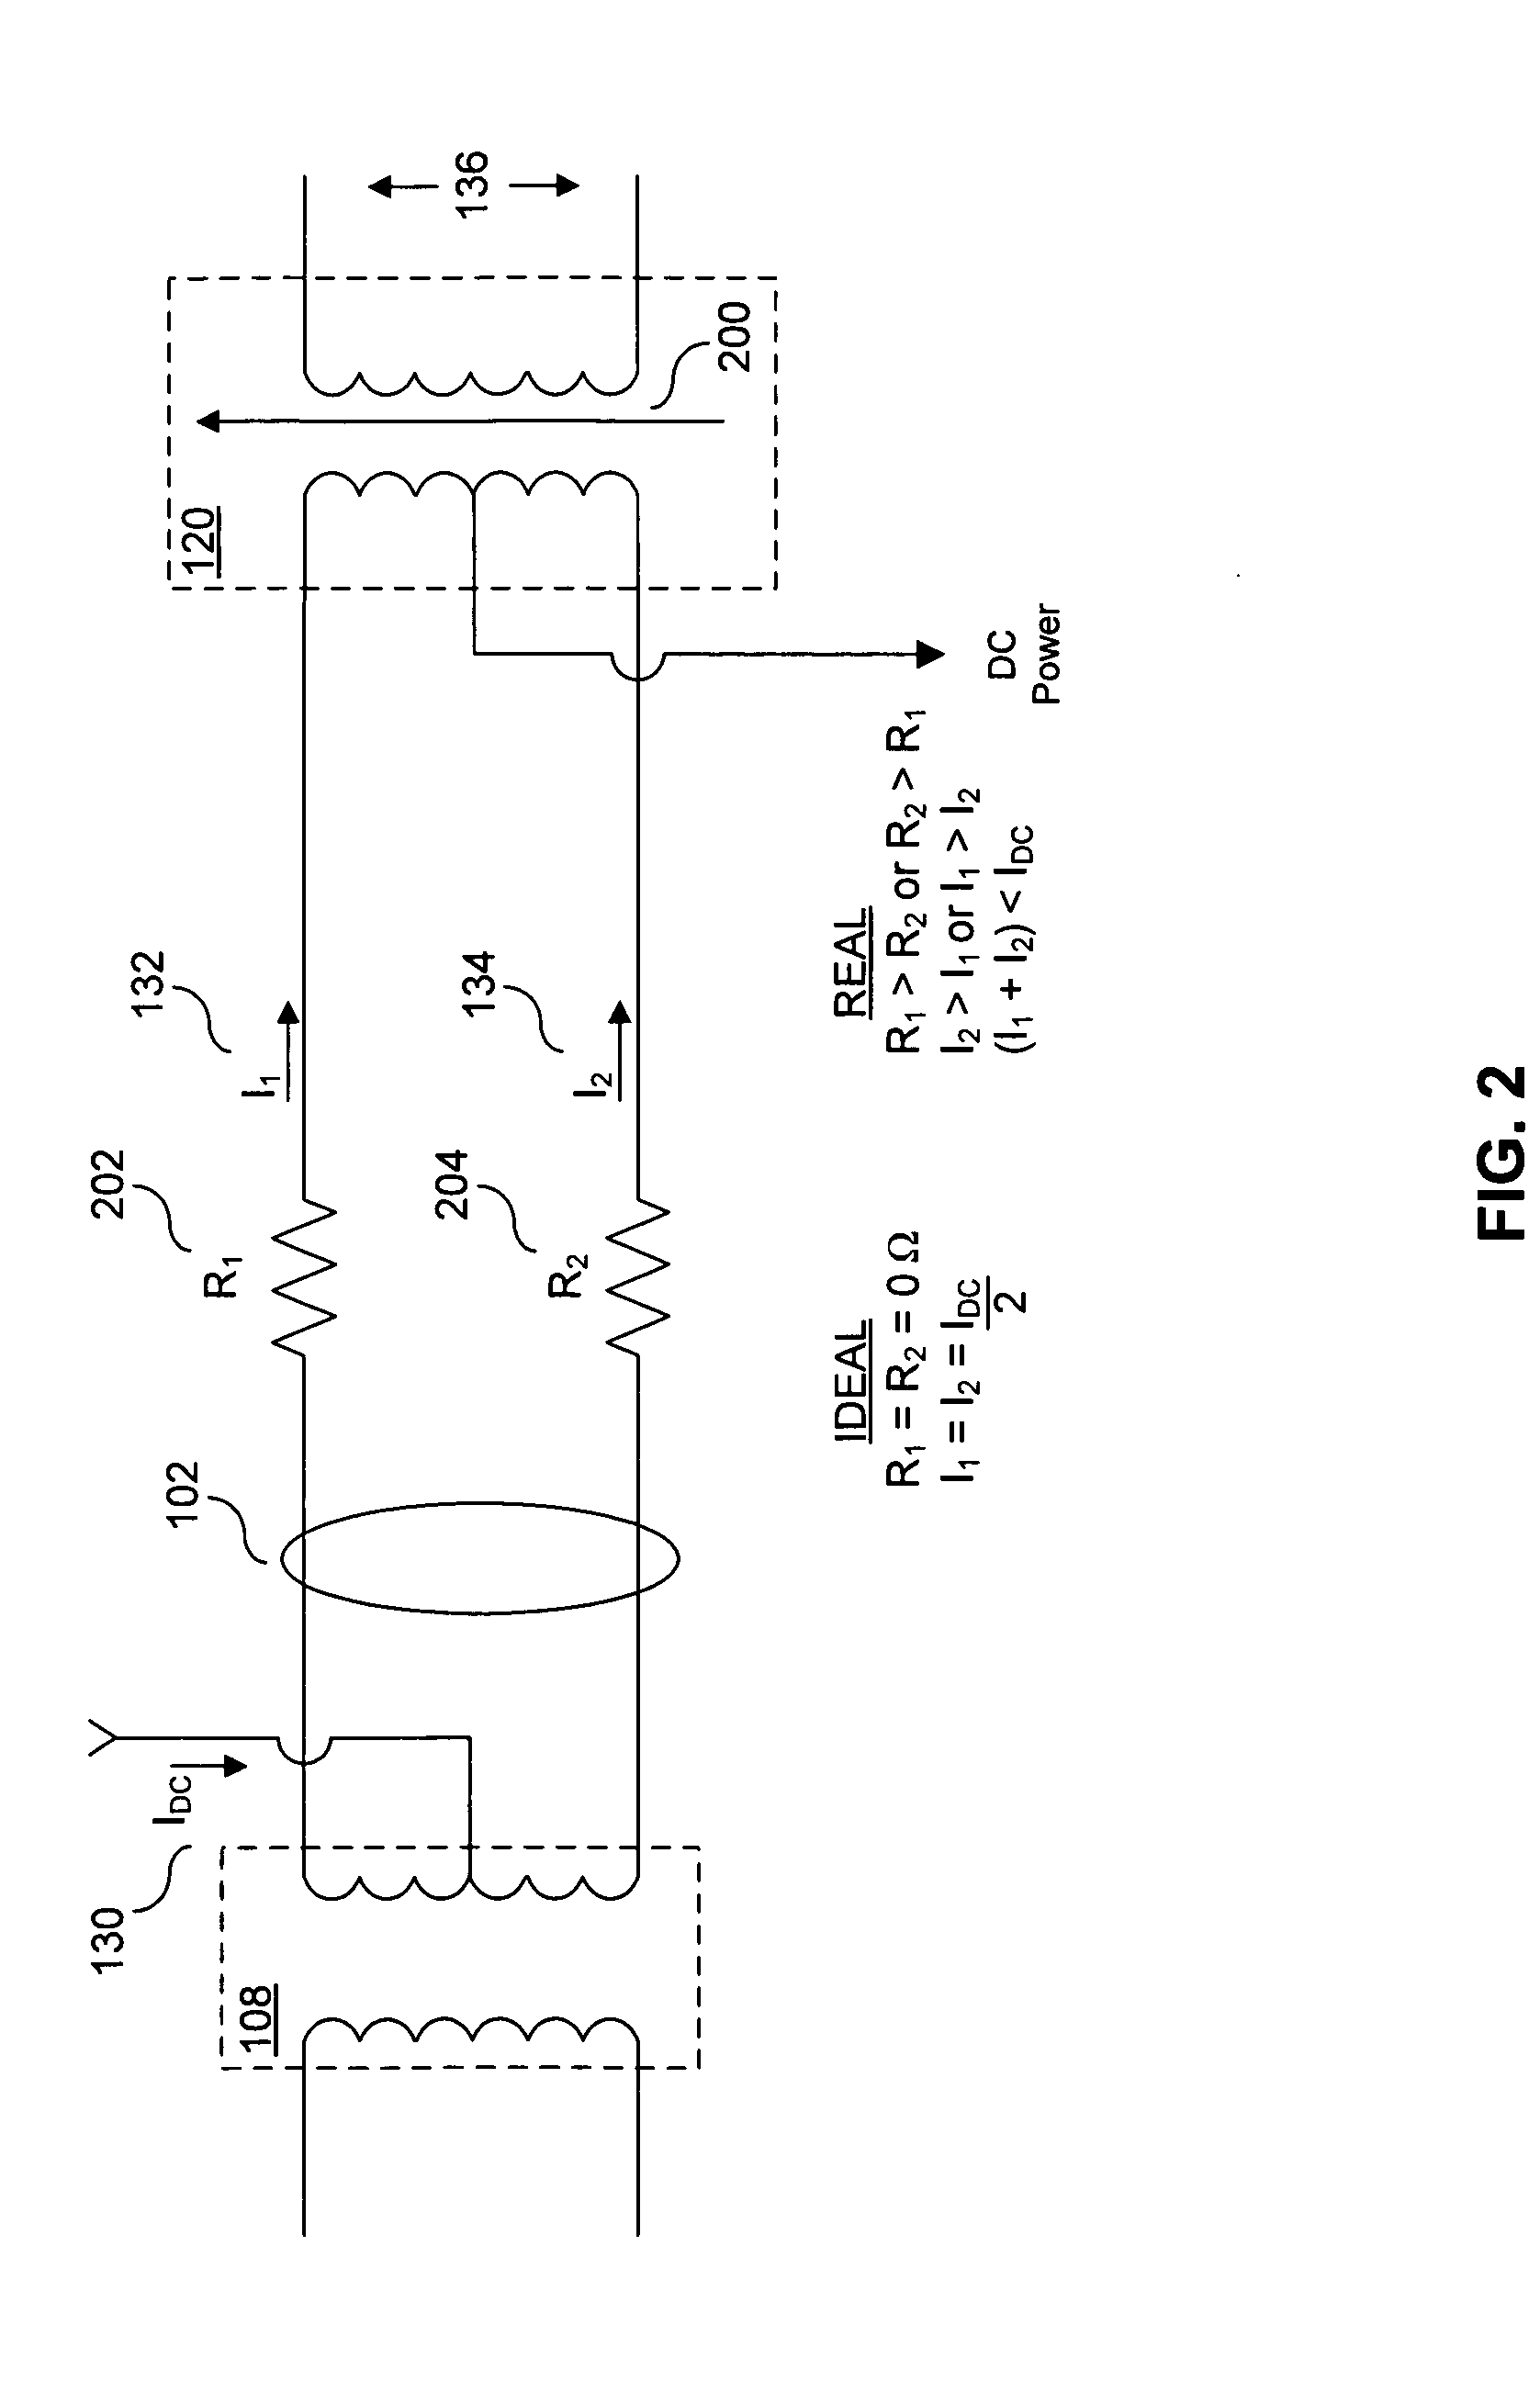 Minimizing saturation caused by power transfer in a communication system transformer